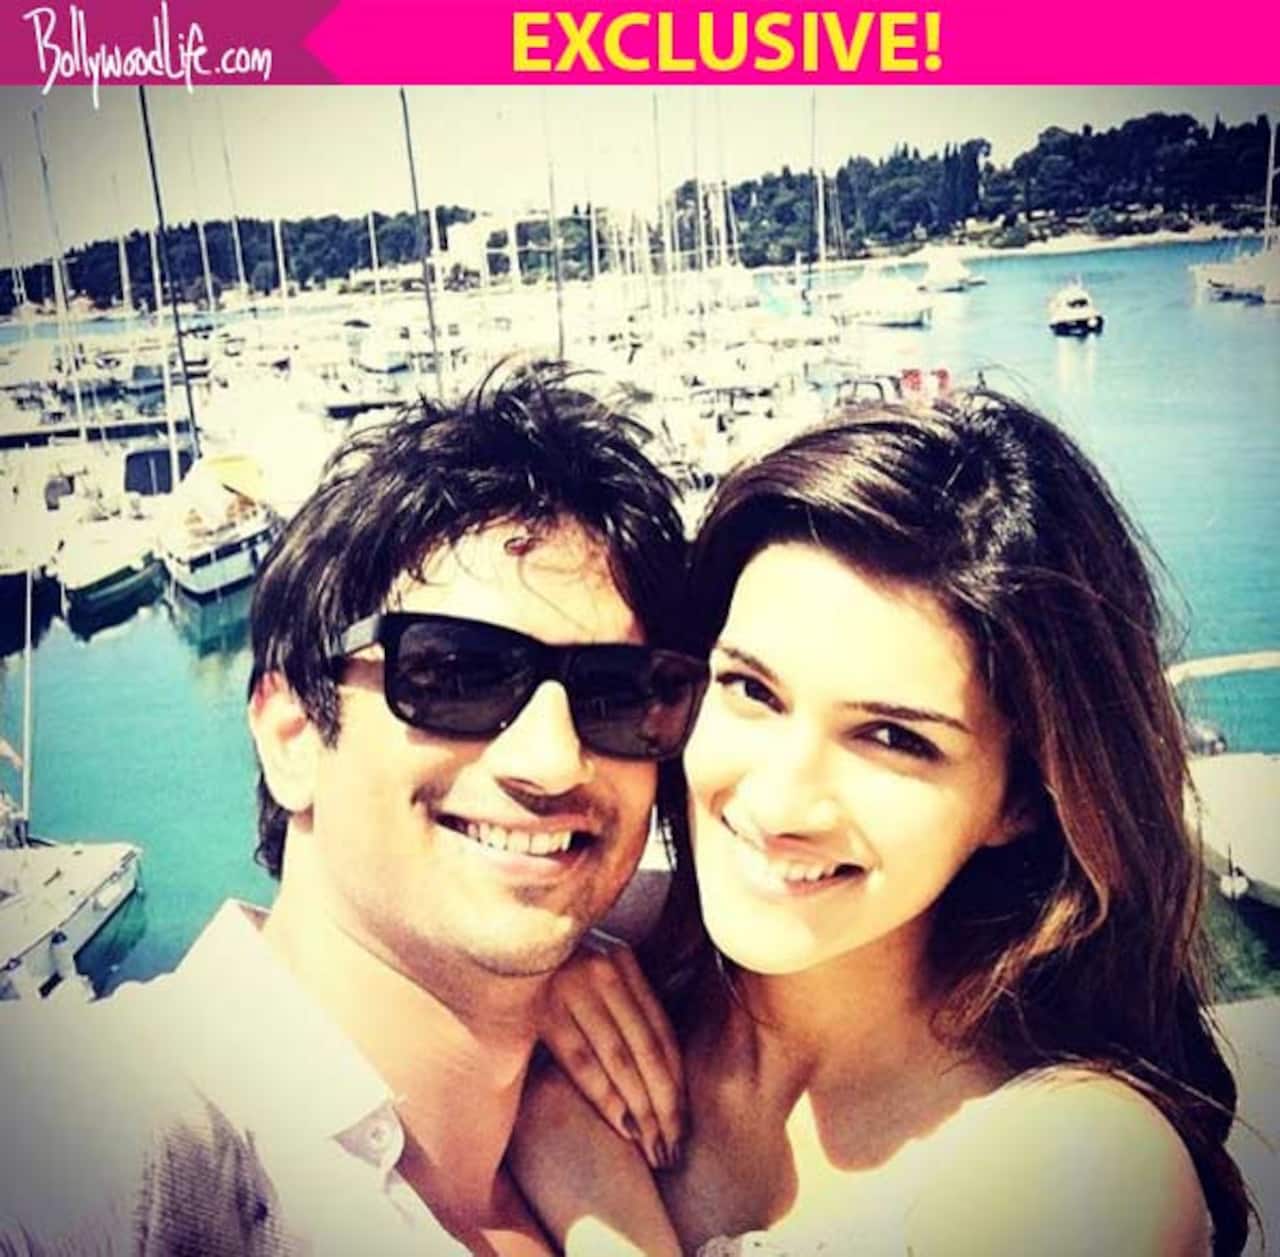 It's OFFICIAL! Sushant Singh Rajput and Kriti Sanon are in a relationship!